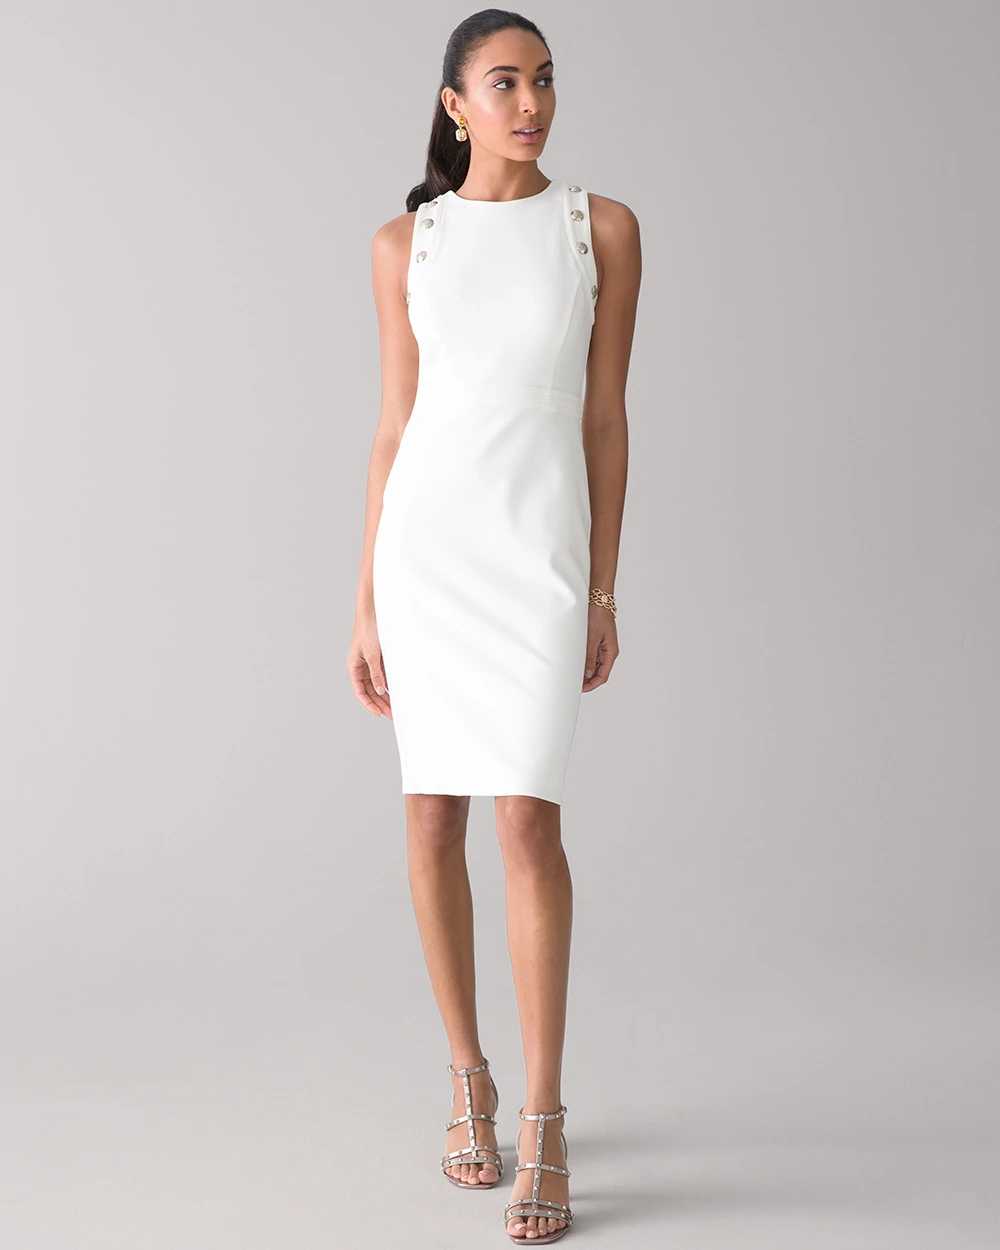 Petite Sleeveless Ponte Dress With Crest Button Detail click to view larger image.